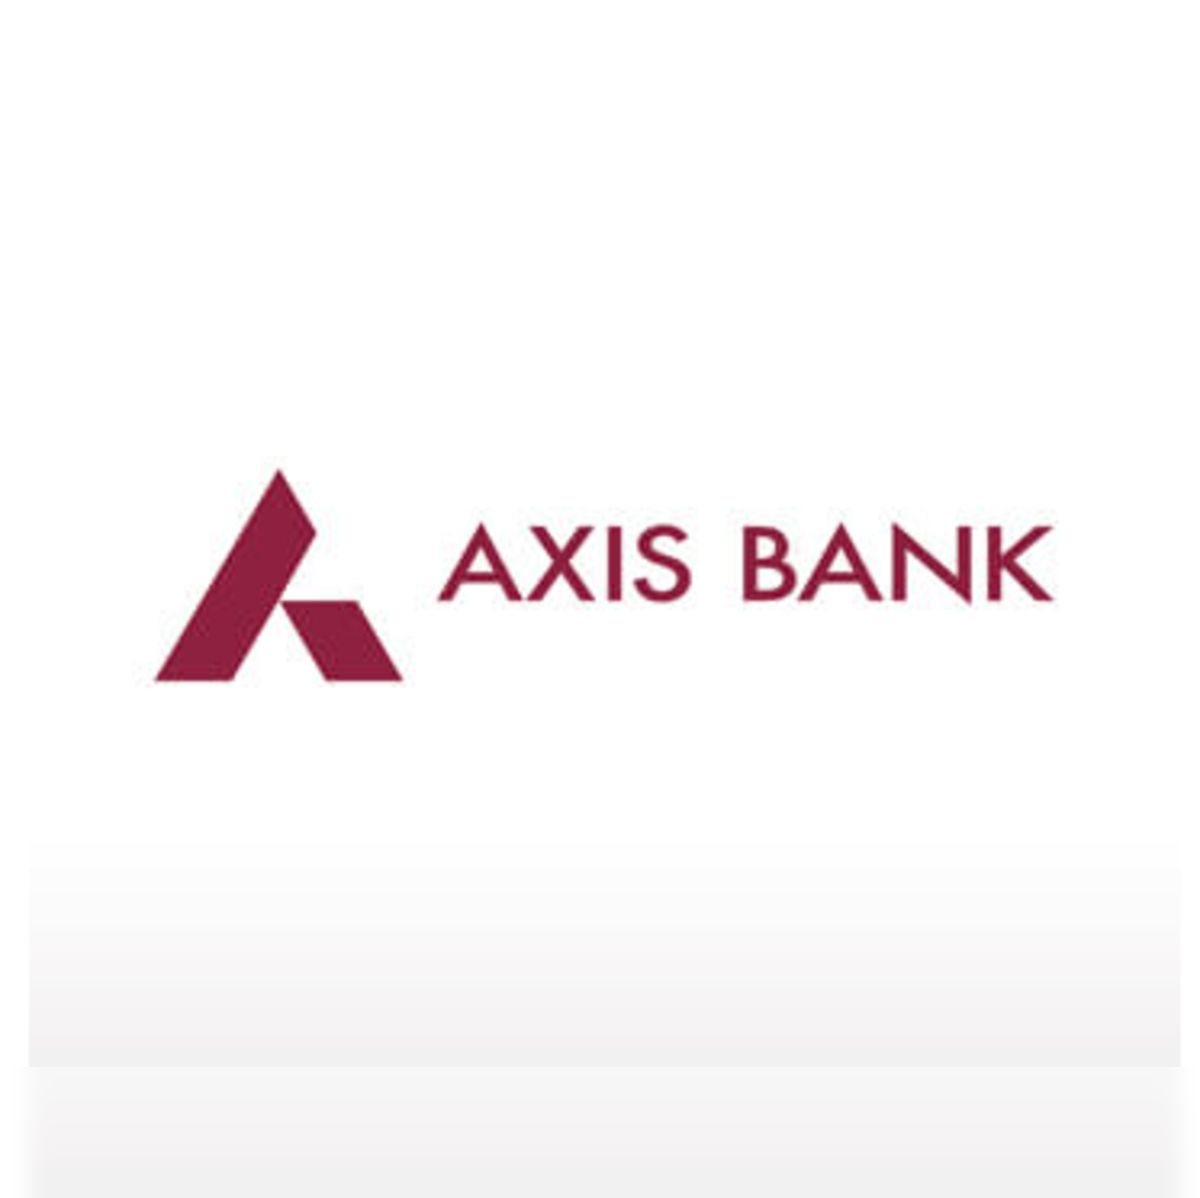 Flipkart Axis Bank Credit Card Review: What You Need to Know - LittlePixi